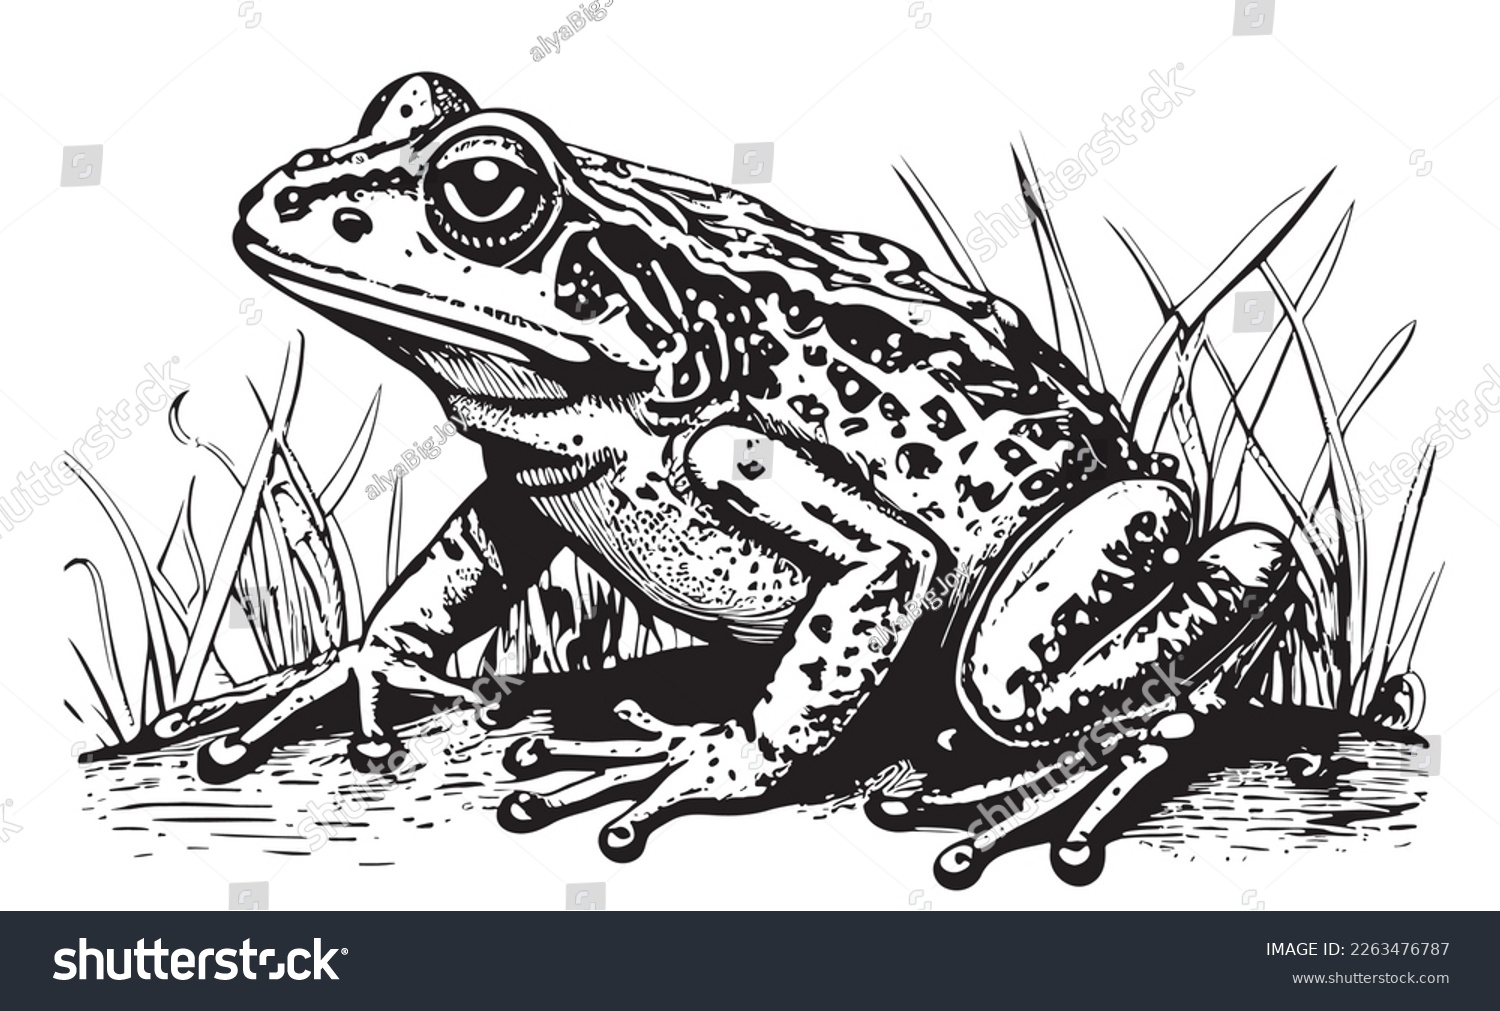 SVG of Frog sitting in grass hand drawn sketch Vector illustration Reptiles svg